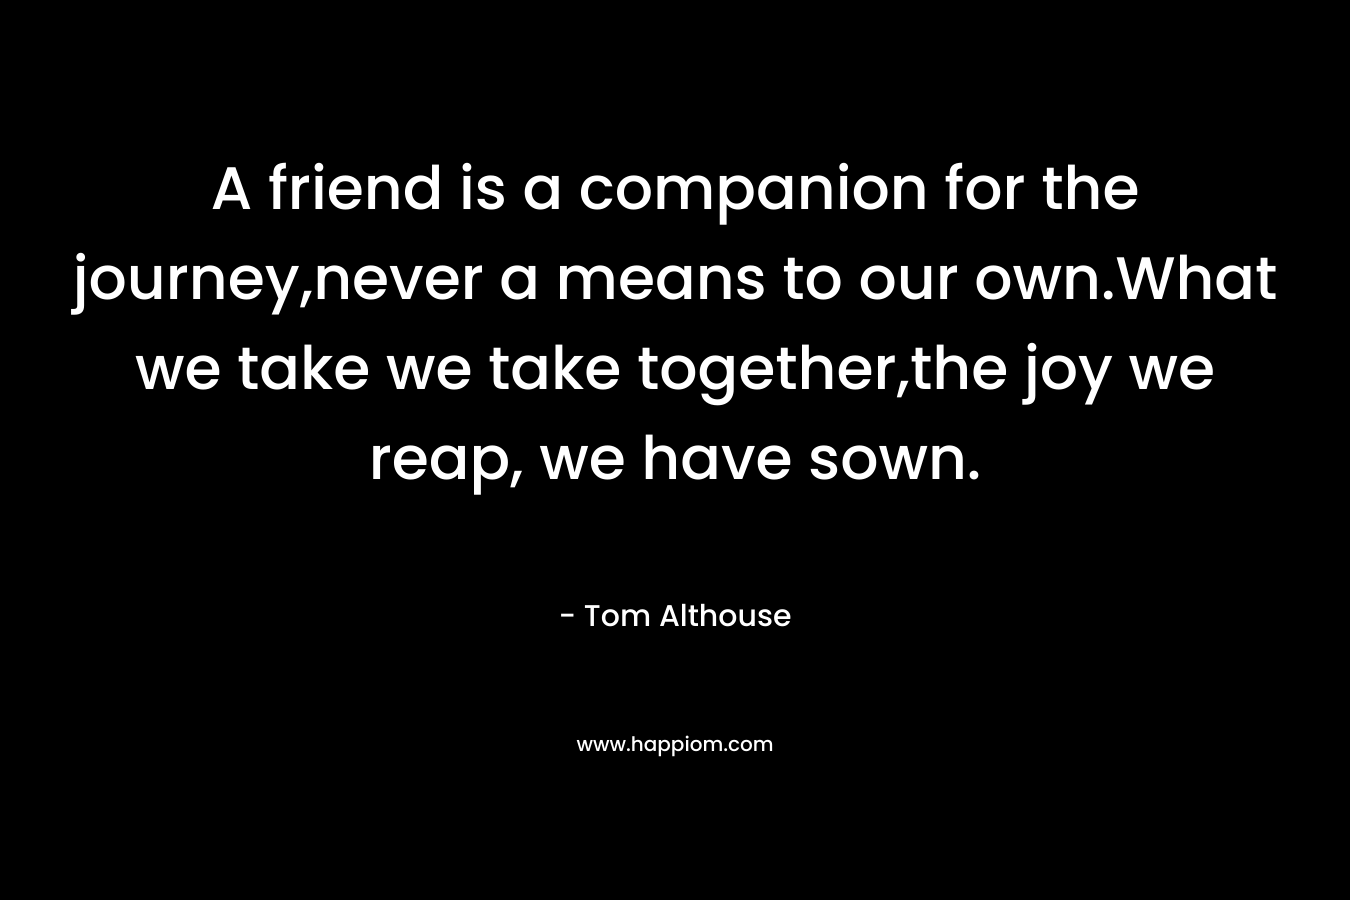 A friend is a companion for the journey,never a means to our own.What we take we take together,the joy we reap, we have sown. – Tom Althouse